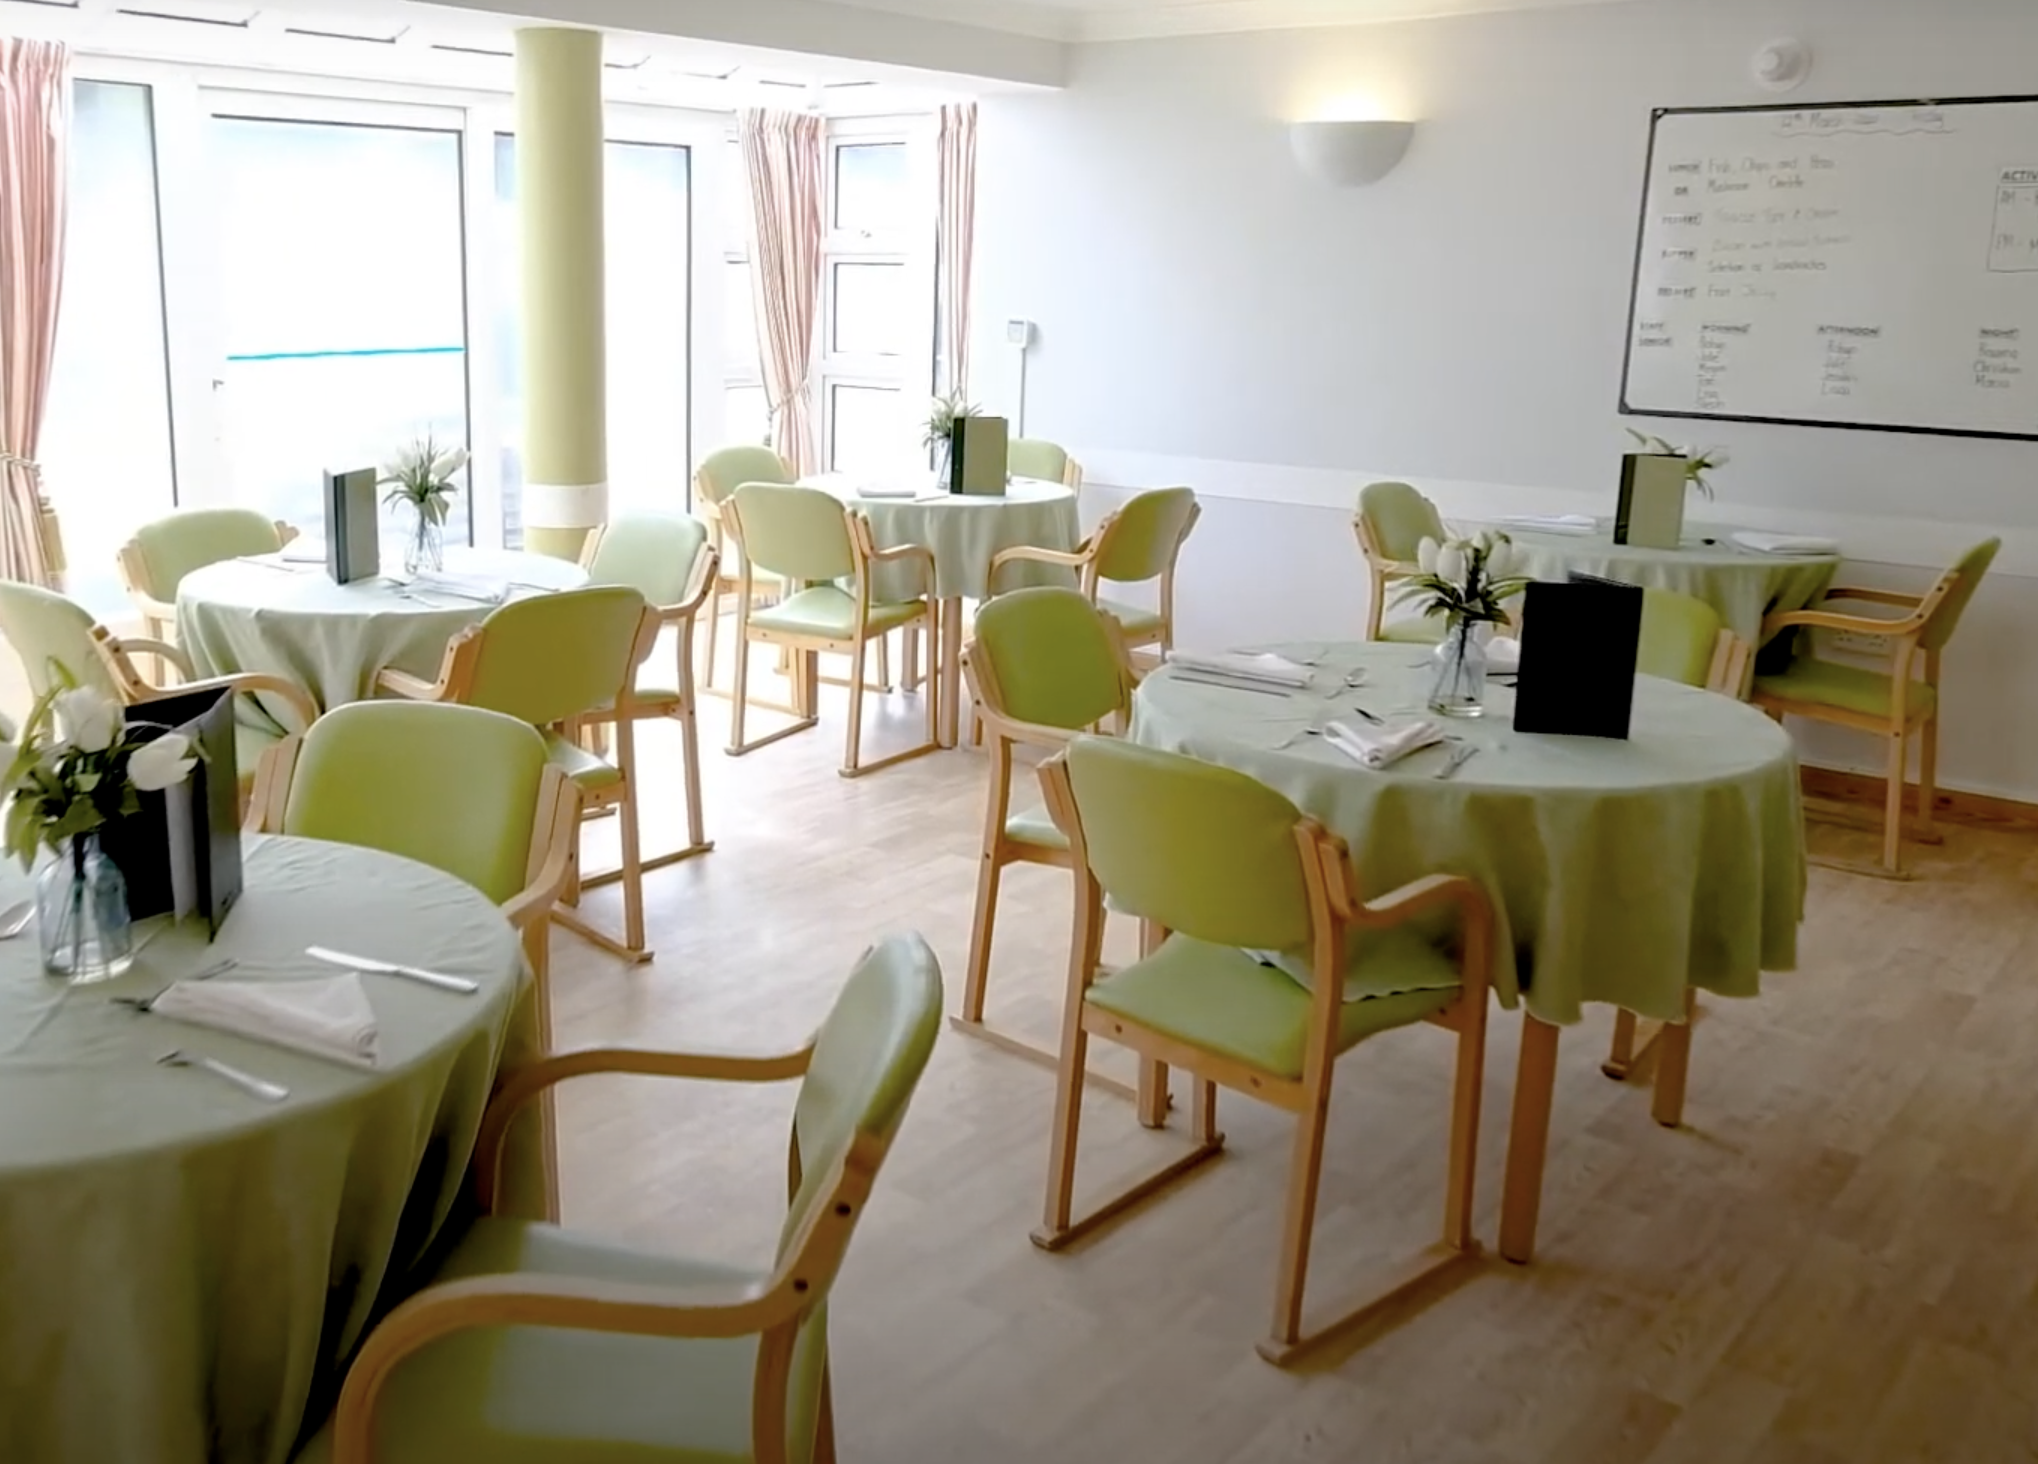 Sussex Housing and Care - Woodlands care home 2